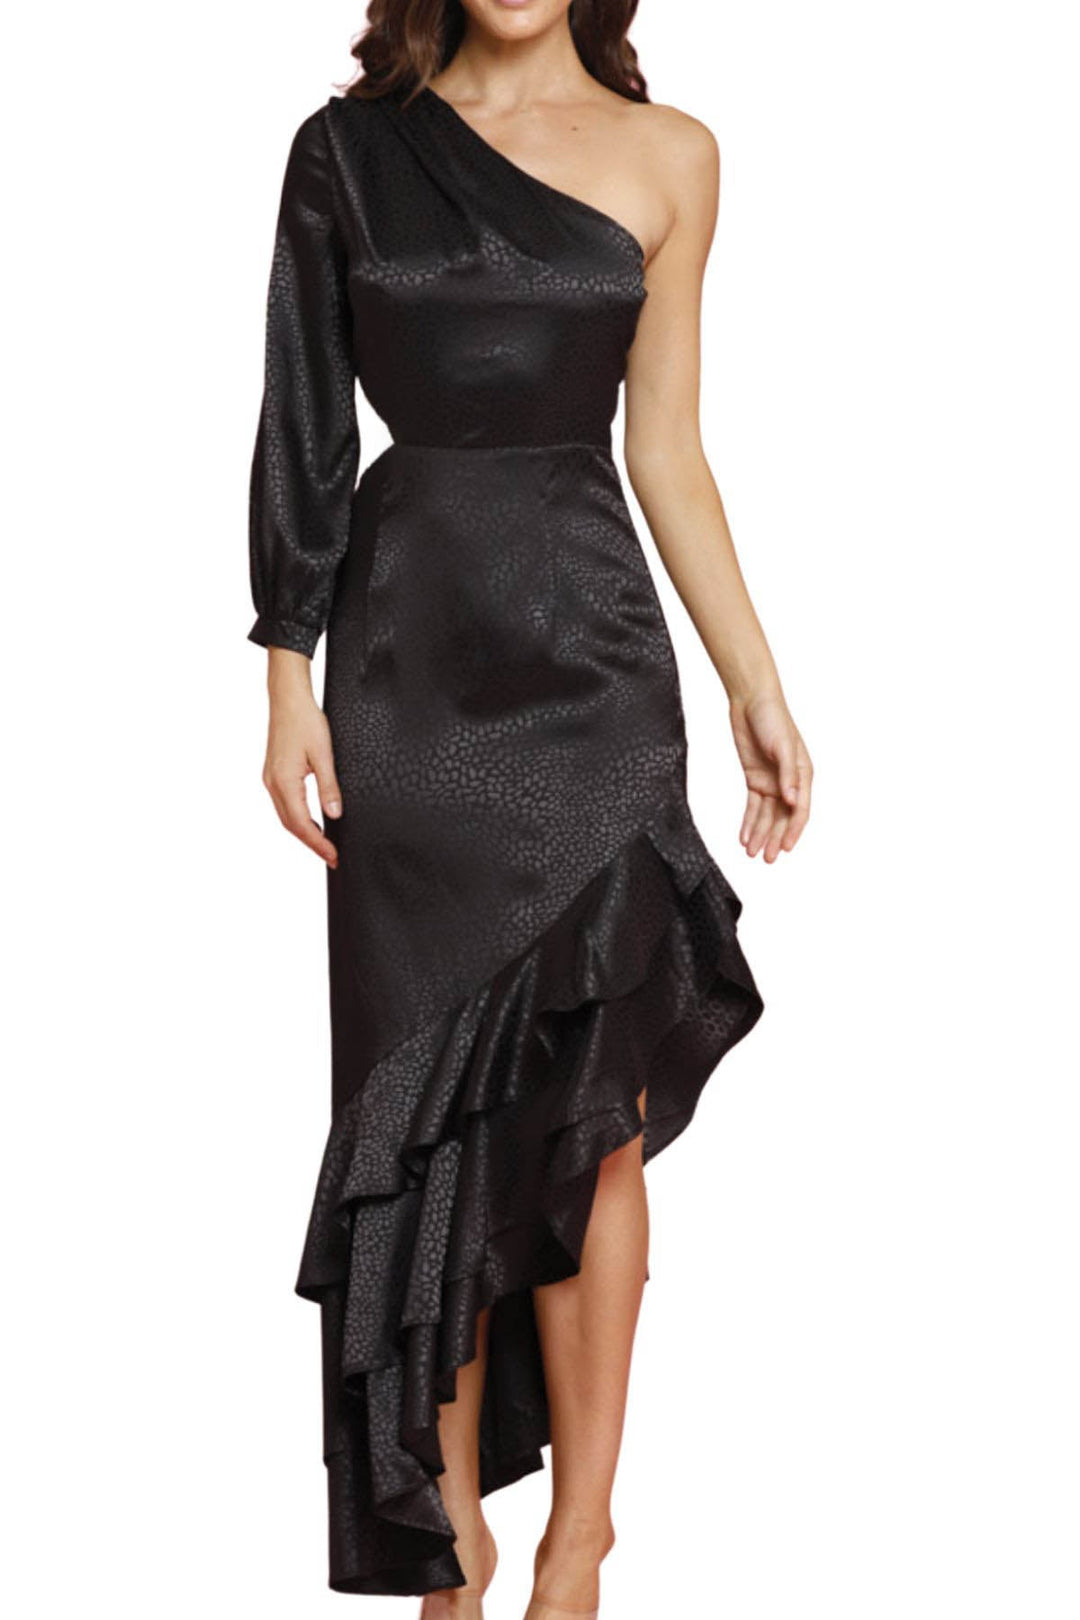 Woman wearing a black cocktail dress one shoulder with a frilled hem, sold and shipped from Pizazz Boutique online women's clothes shops Australia